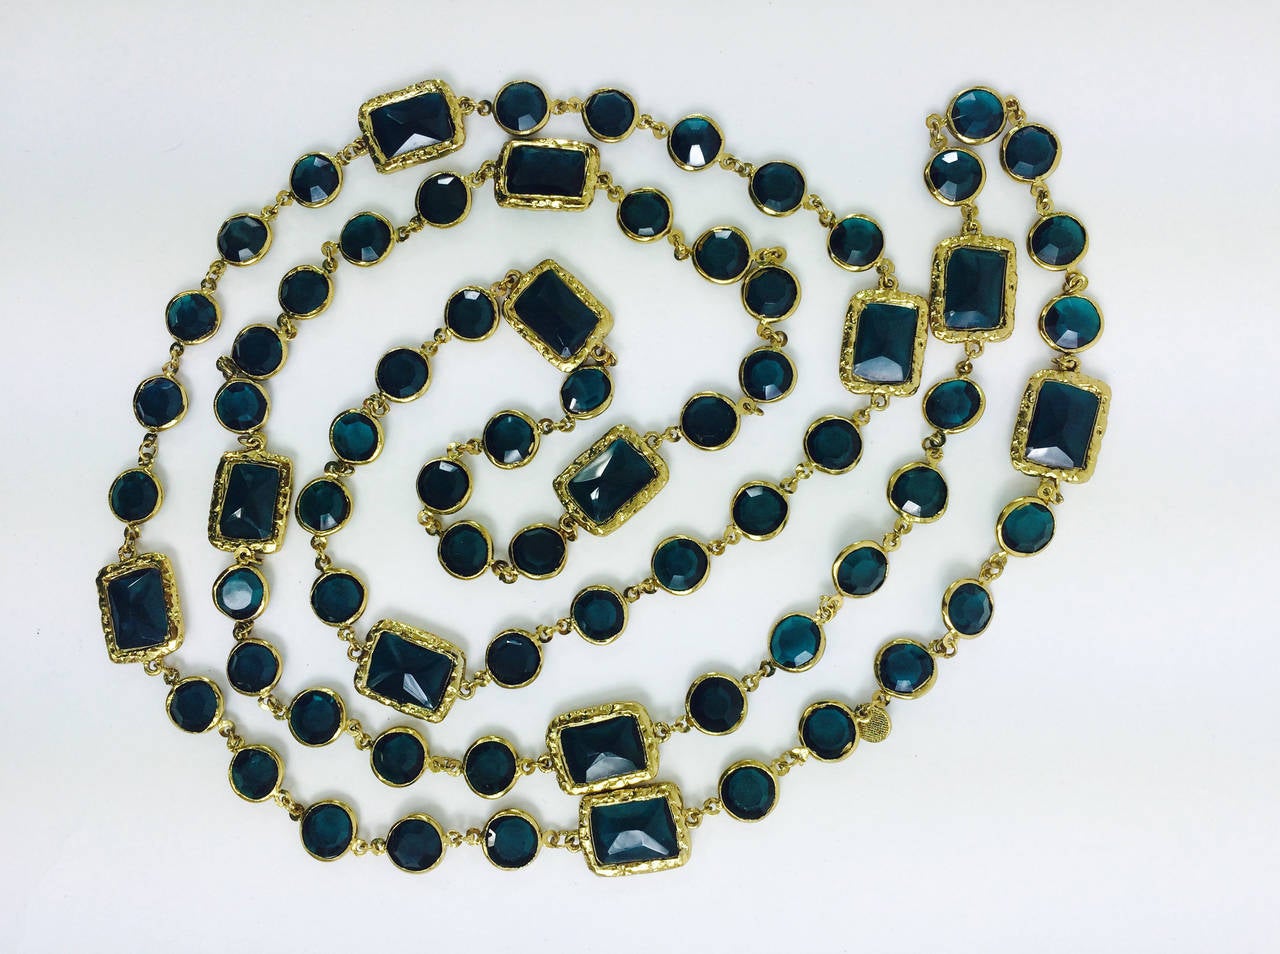 Gorgeous chicklet necklace from Chanel 1981, in teal/green depending on the light the colour looks teal/aqua/green...Pair this with pearls or chains for the classic Chanel look...Bezel set emerald stones in roundels and 